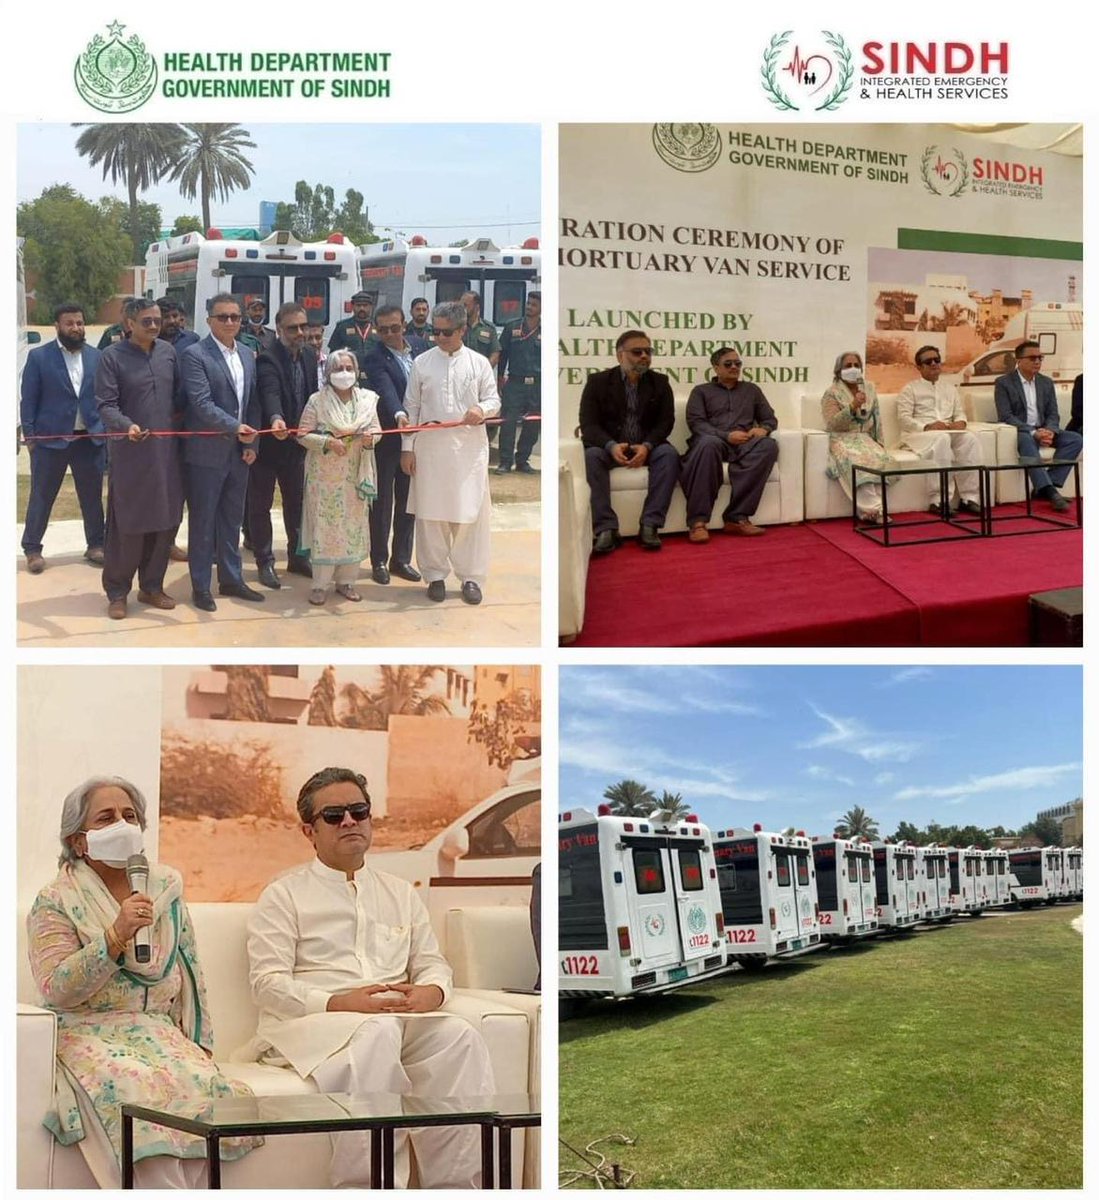 #SindhGovernment Launches Free Mortuary Van Service. Health minister Sindh @AzraPechuho inaugurated the fleet of 25 vans in #Karachi. This service will be available in regional hubs of the province and could be availed of by dialing 1122. #SindhHealth #SindhRescue1122 #Sindh